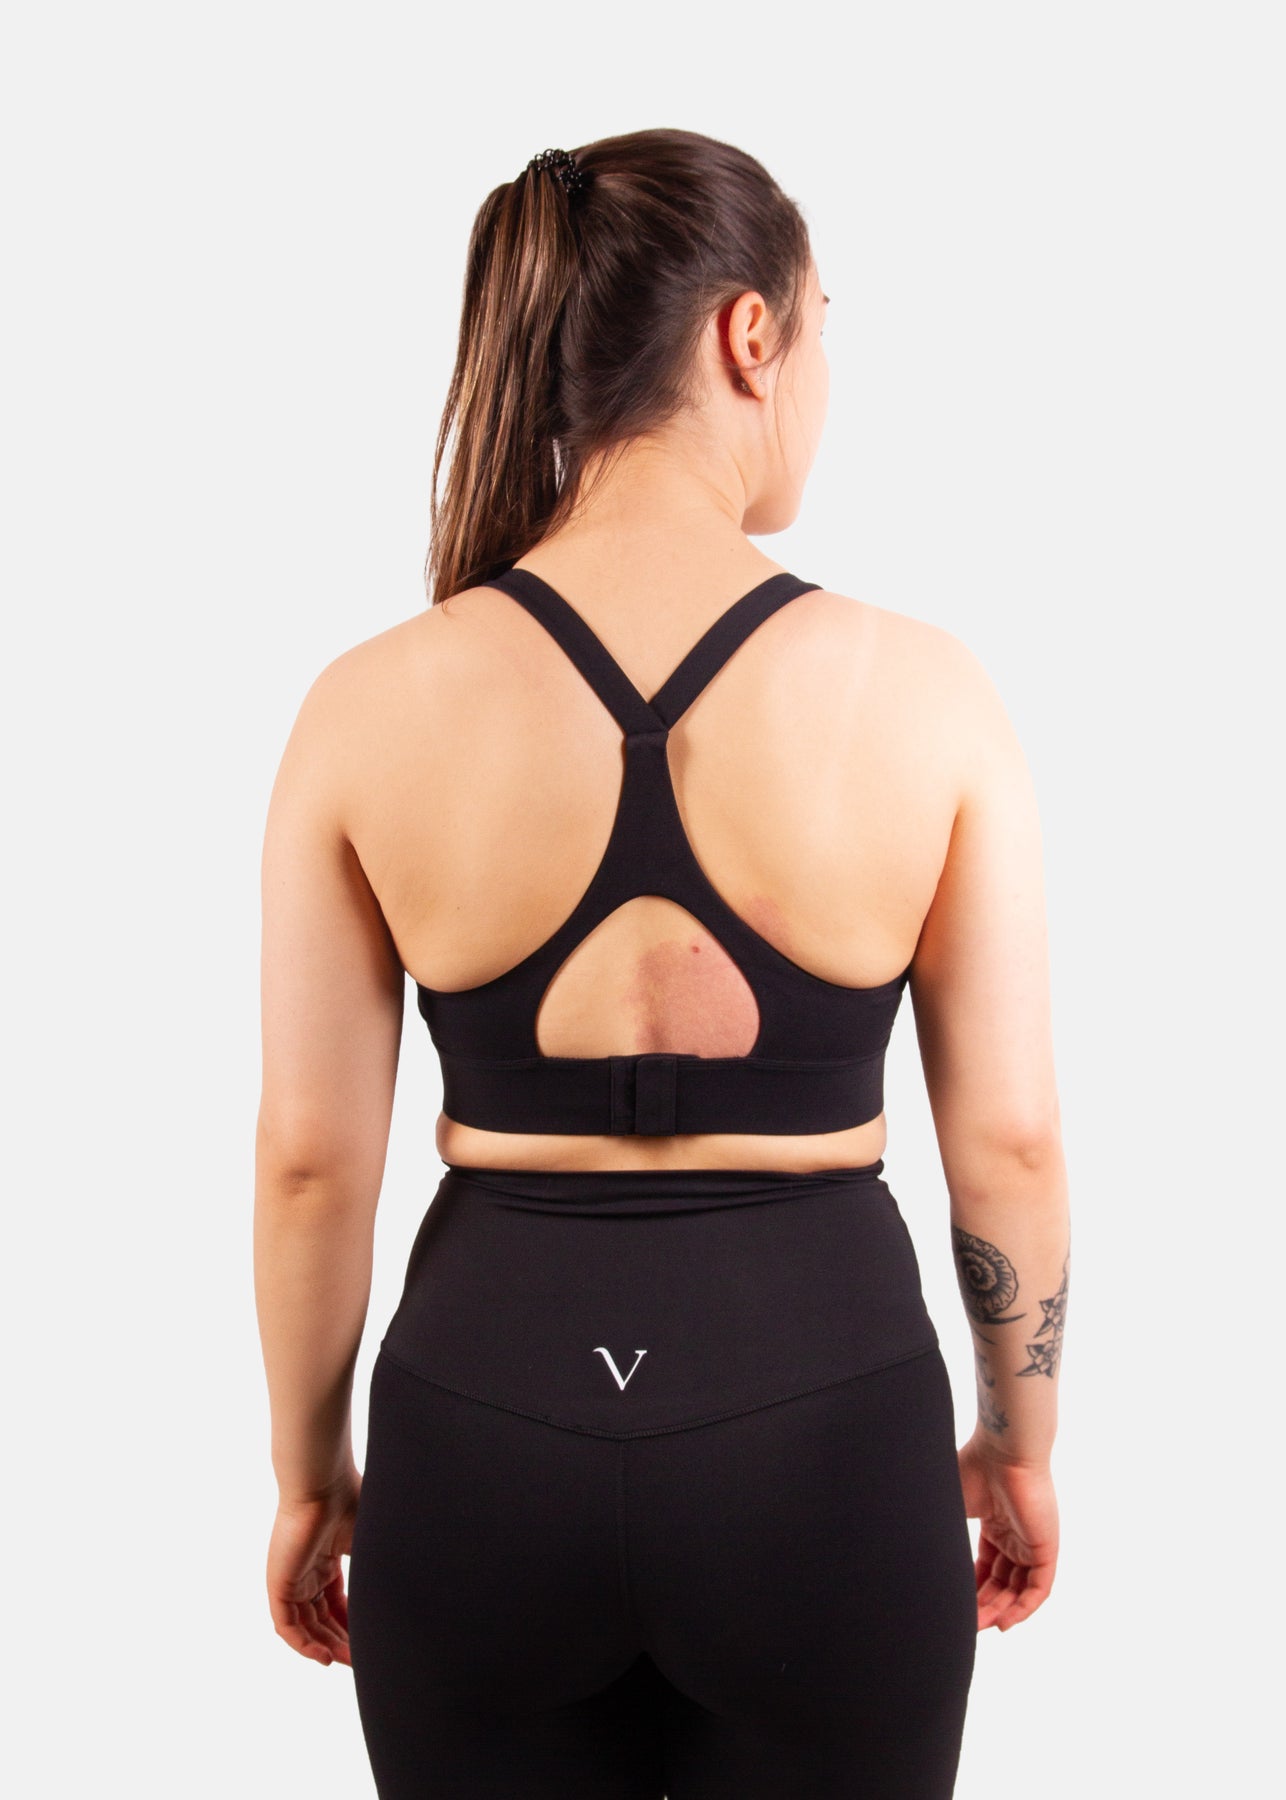 Free Sports Bras are going, going, (almost) gone👀🚨 - Vitae Apparel